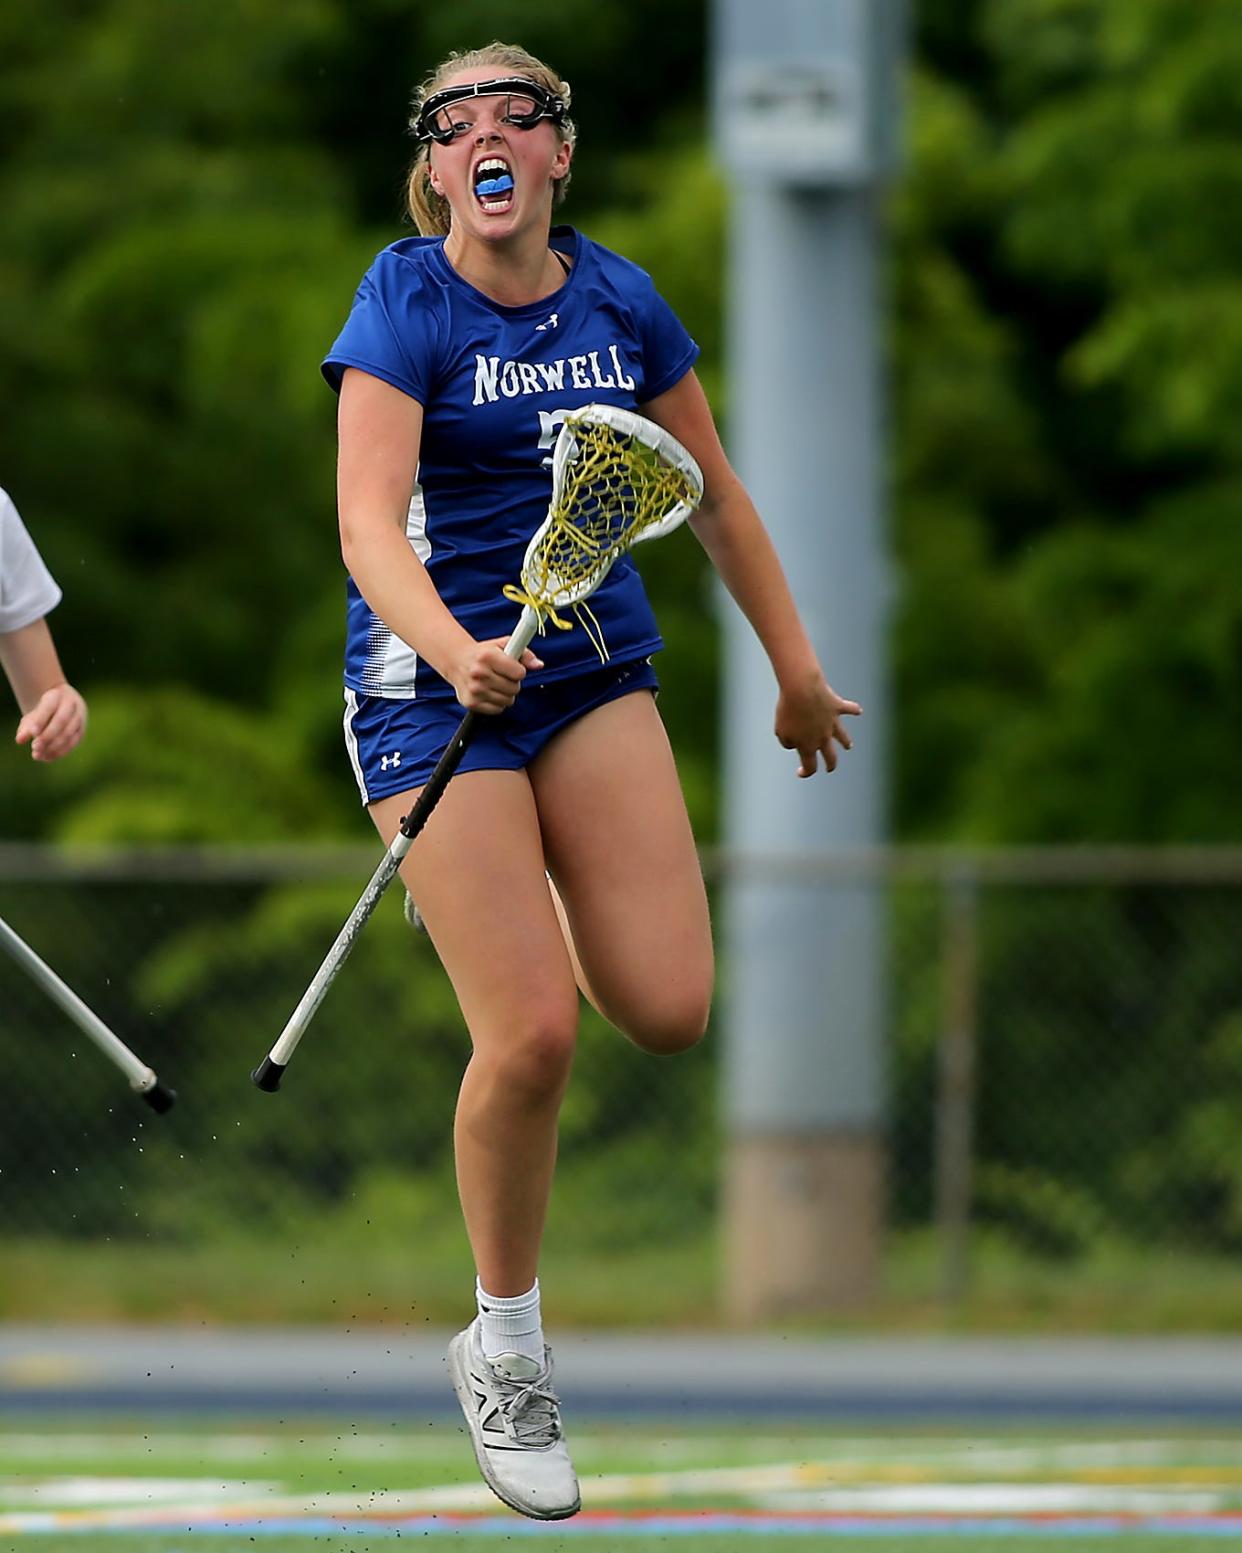 Norwell's Danielle Cox celebrates her goal to give Norwell the 2-1 lead over Cohasset during first half action of their game against Cohasset in the Division 3 Elite 8 game at Cohasset High School on Friday, June 9, 2023. Norwell would win in OT 9-8.